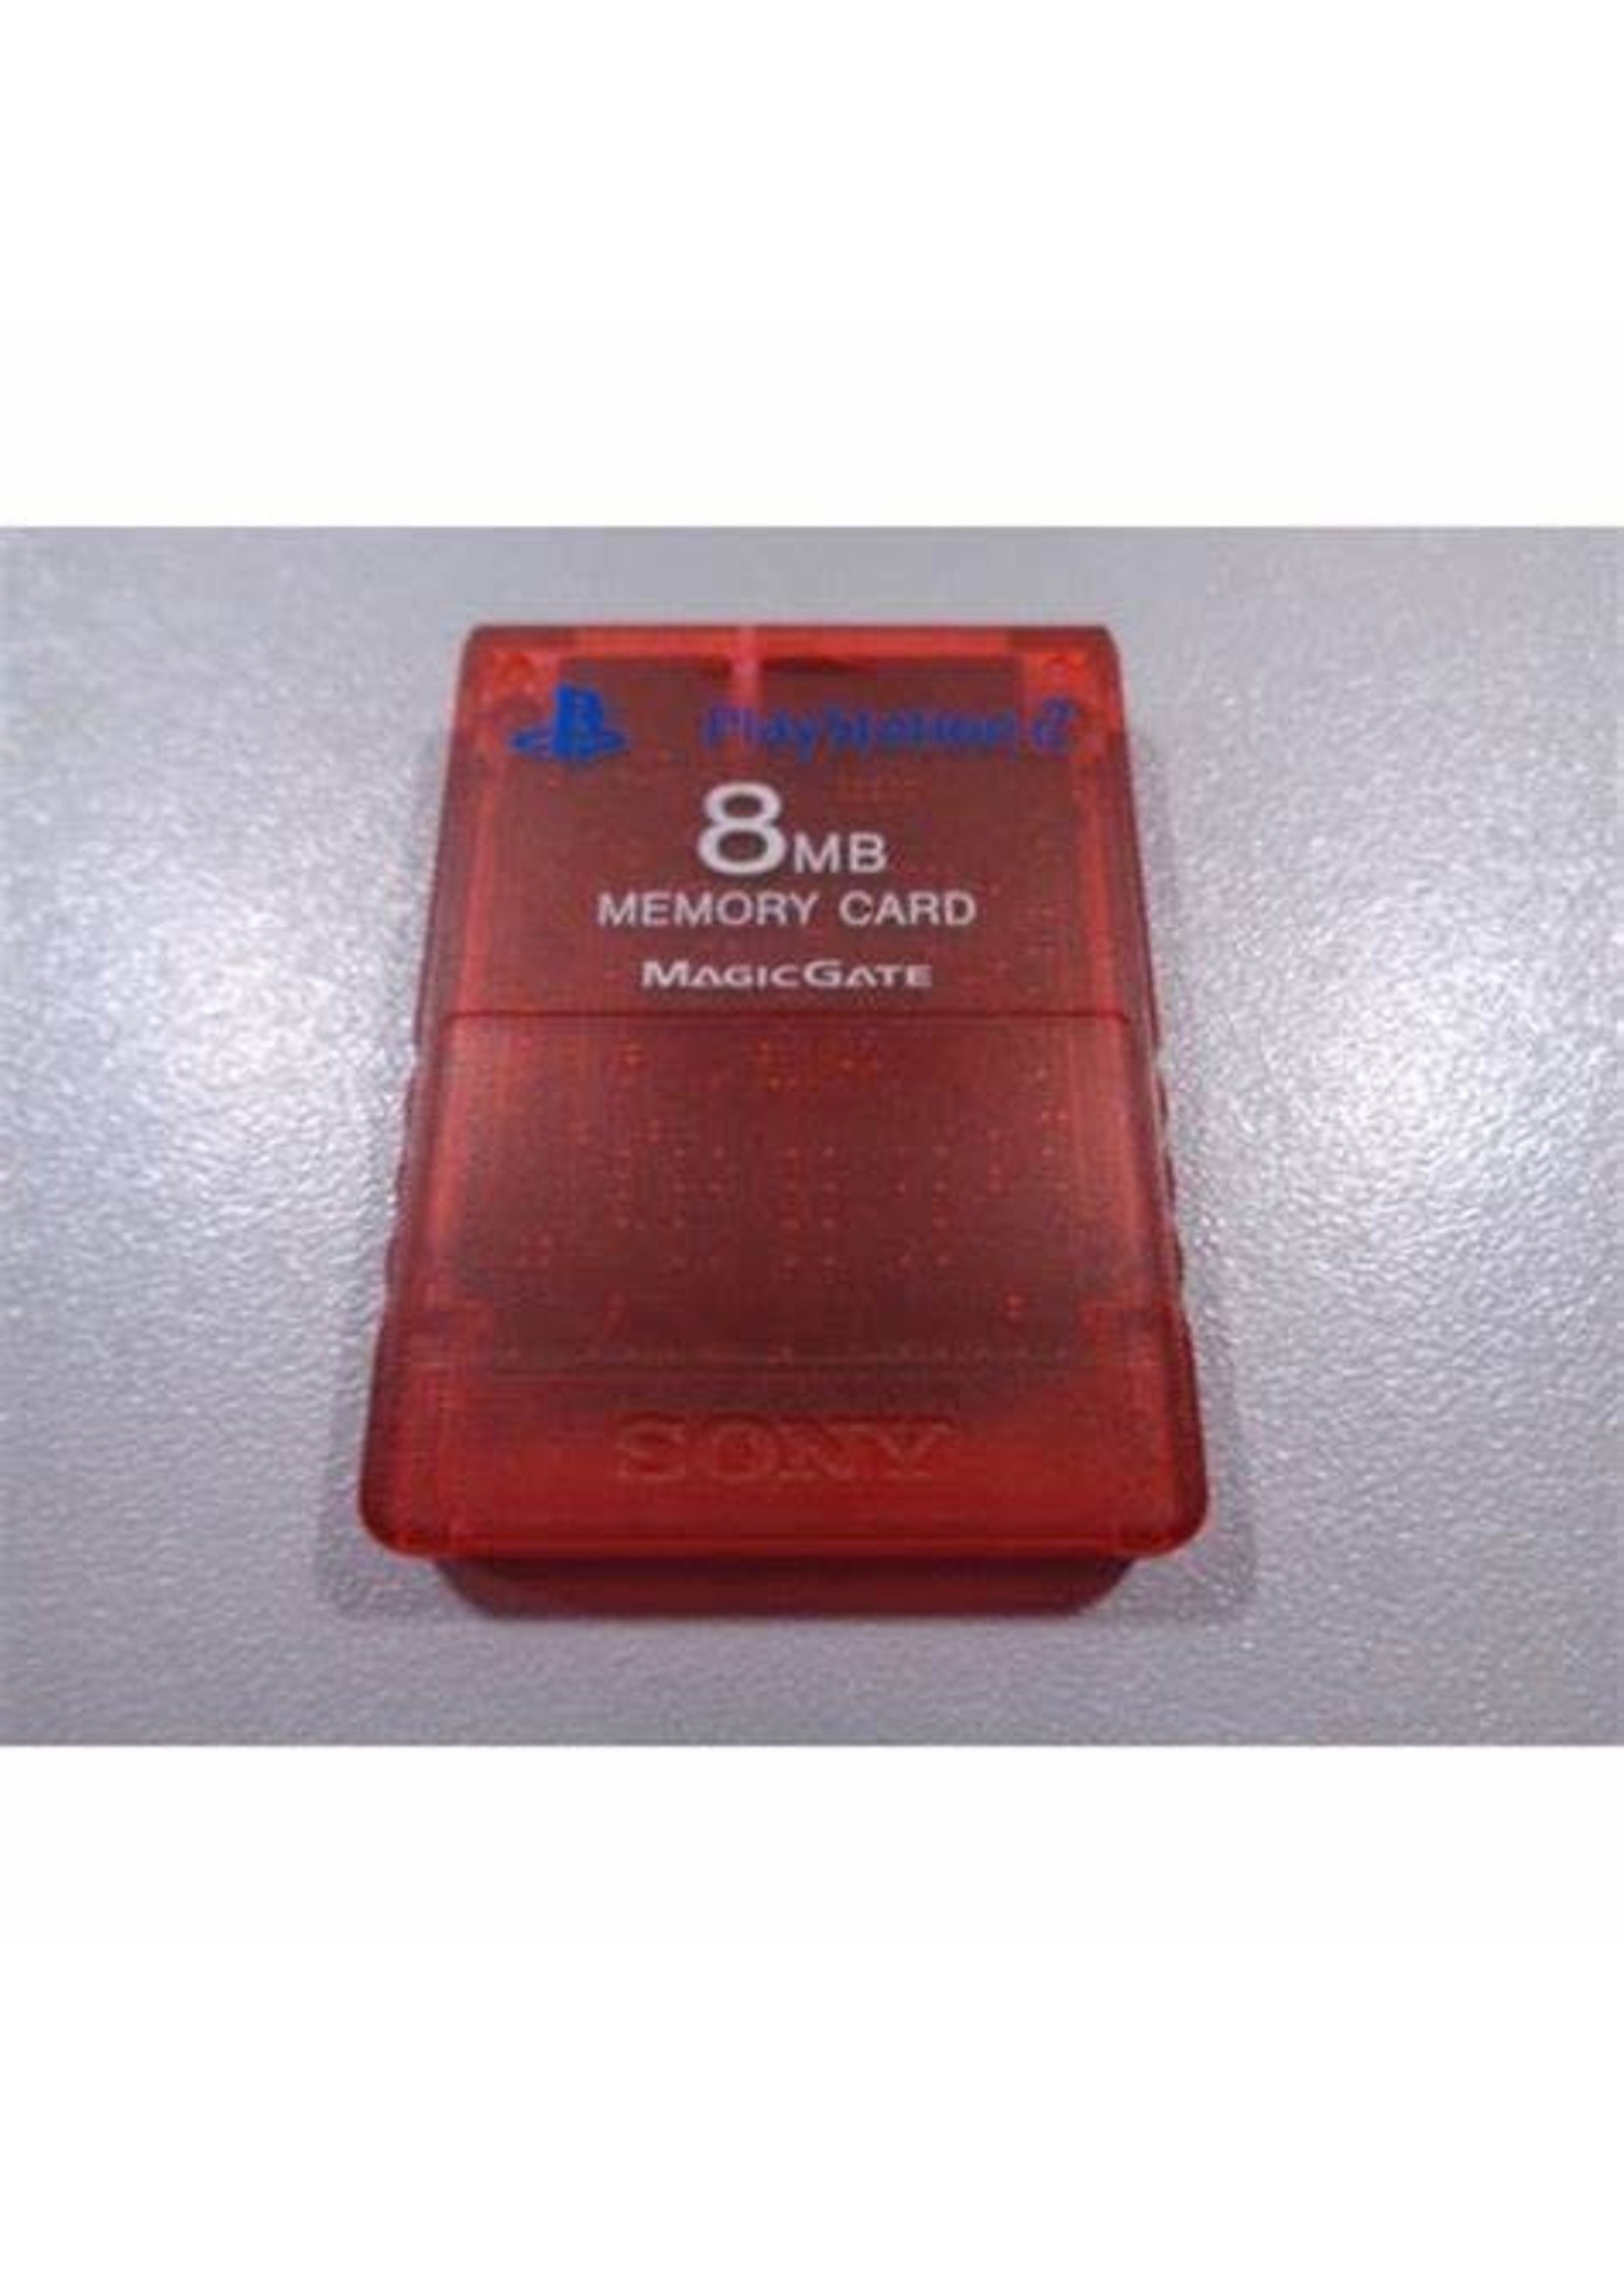 8MB Ps2 Memory Card-Red